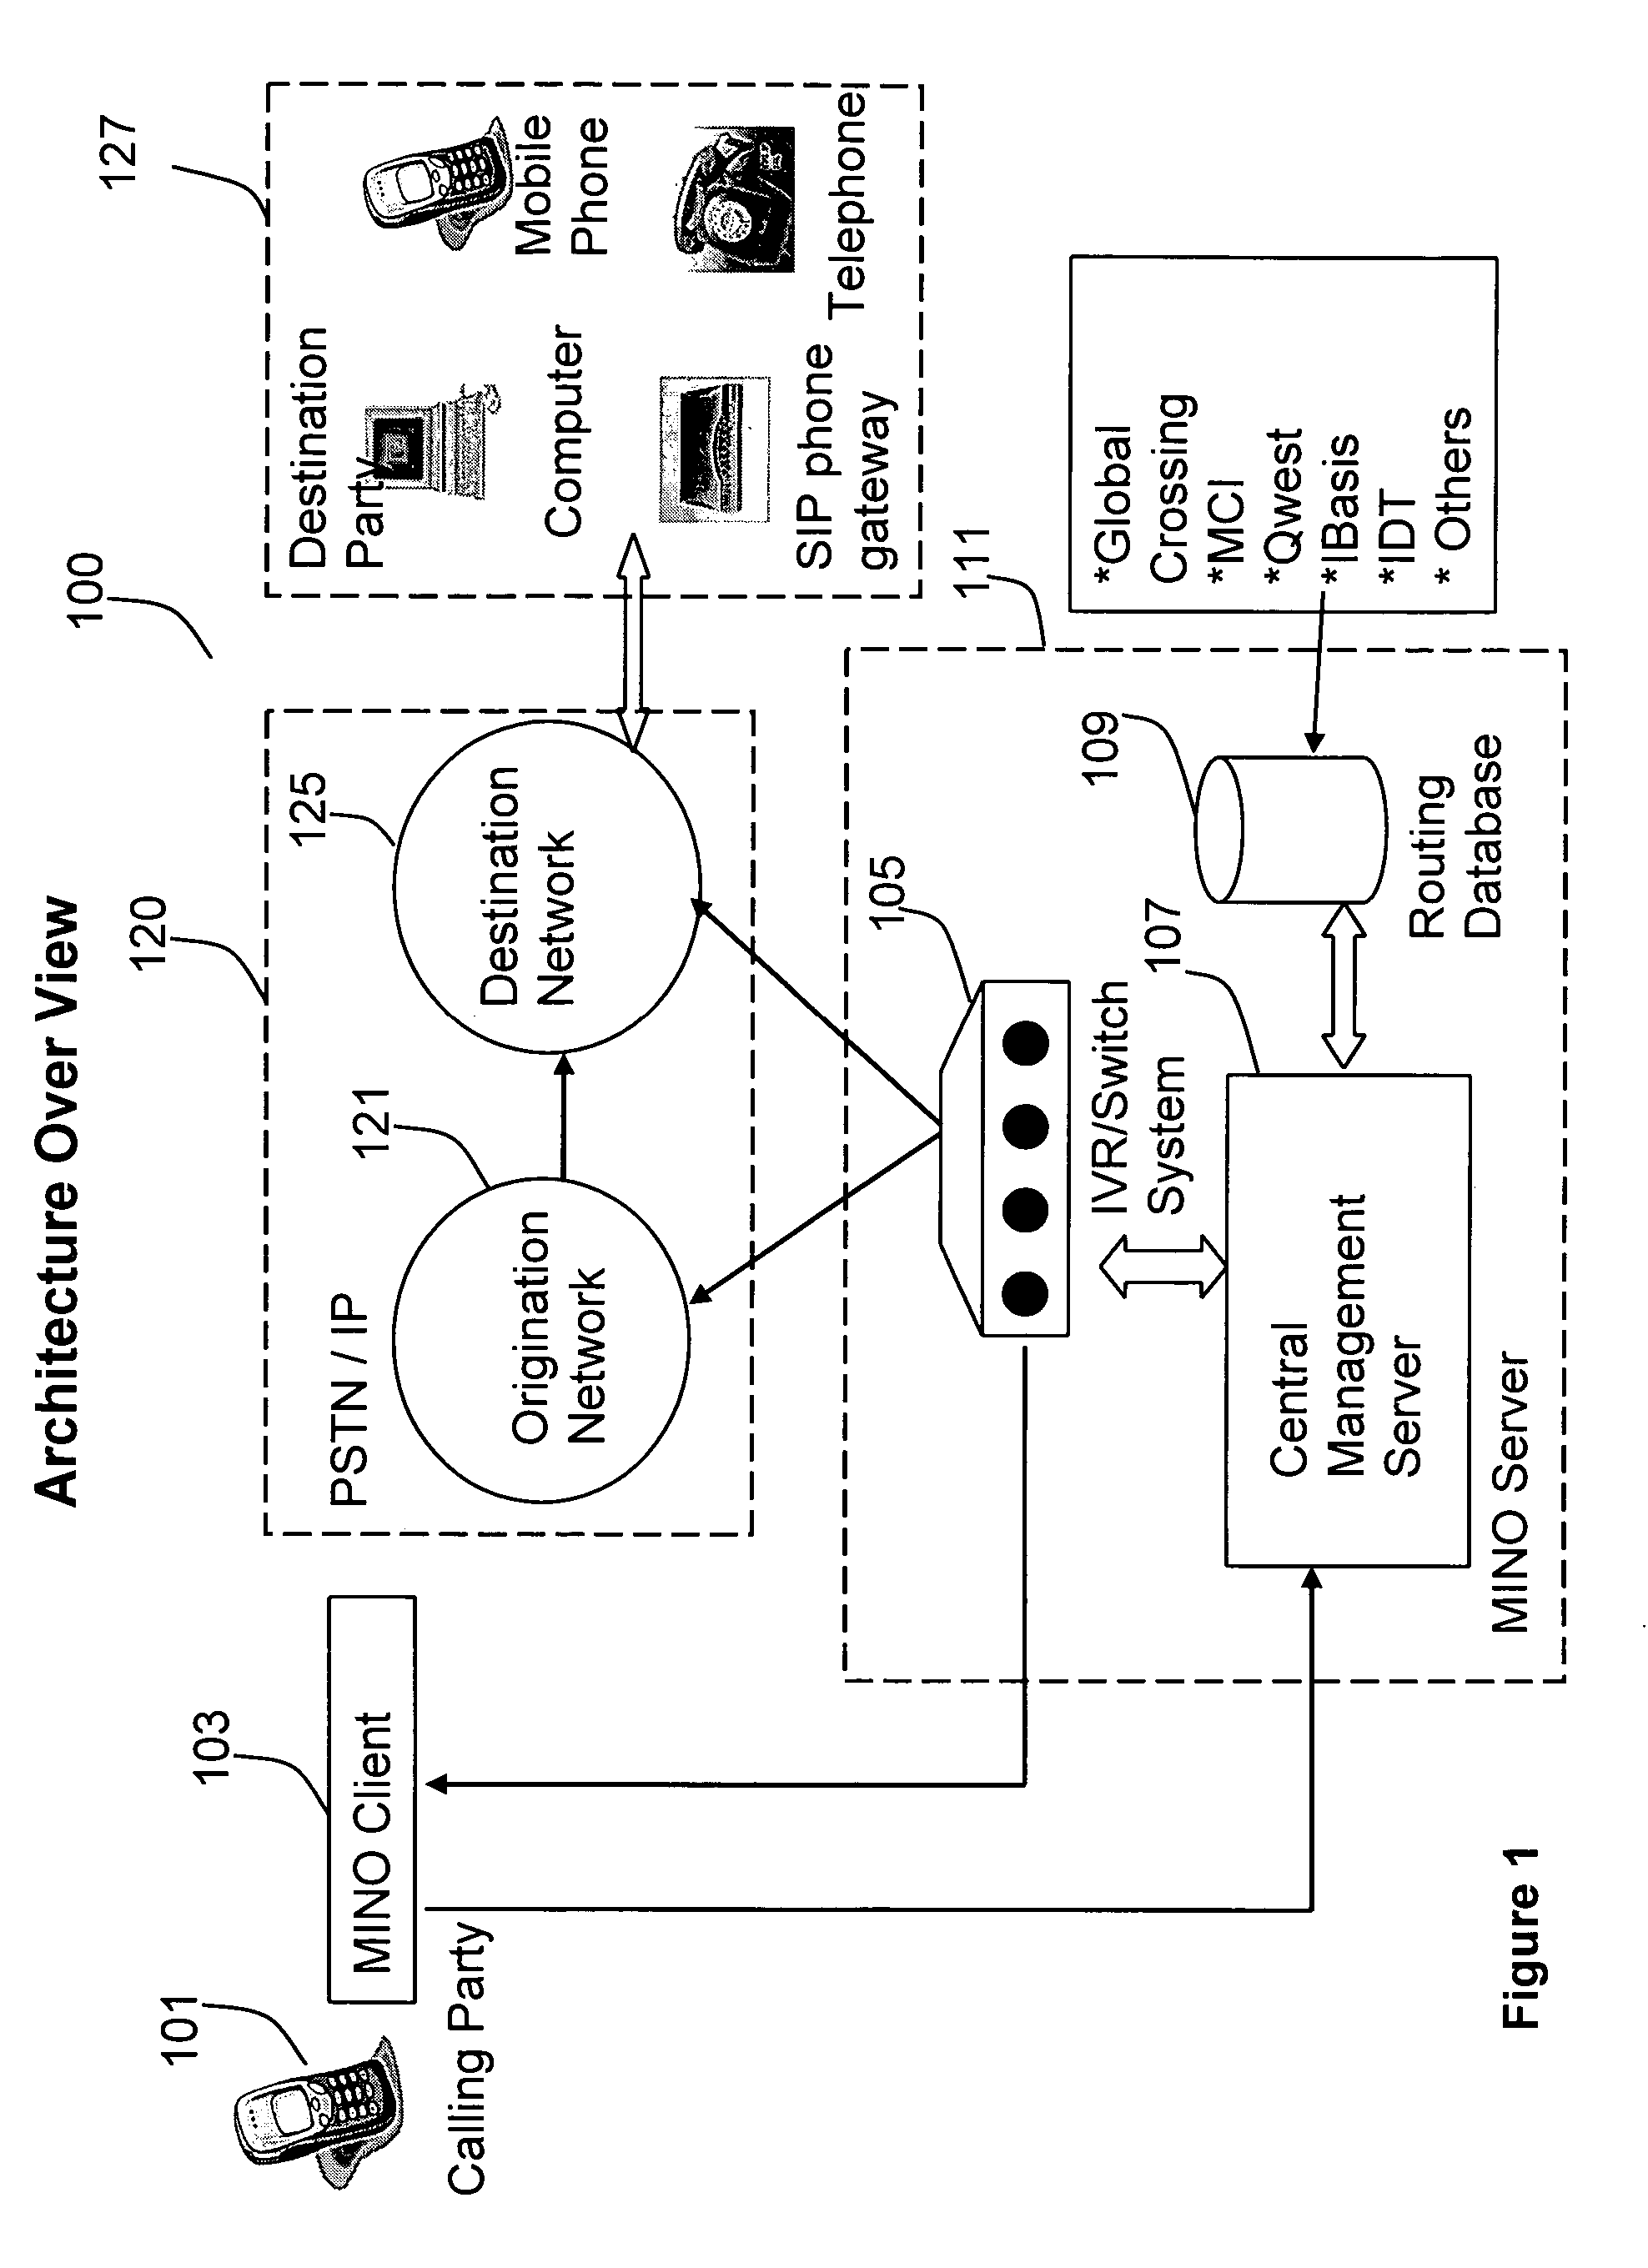 Method and system for least call routing for one or more telephone calls